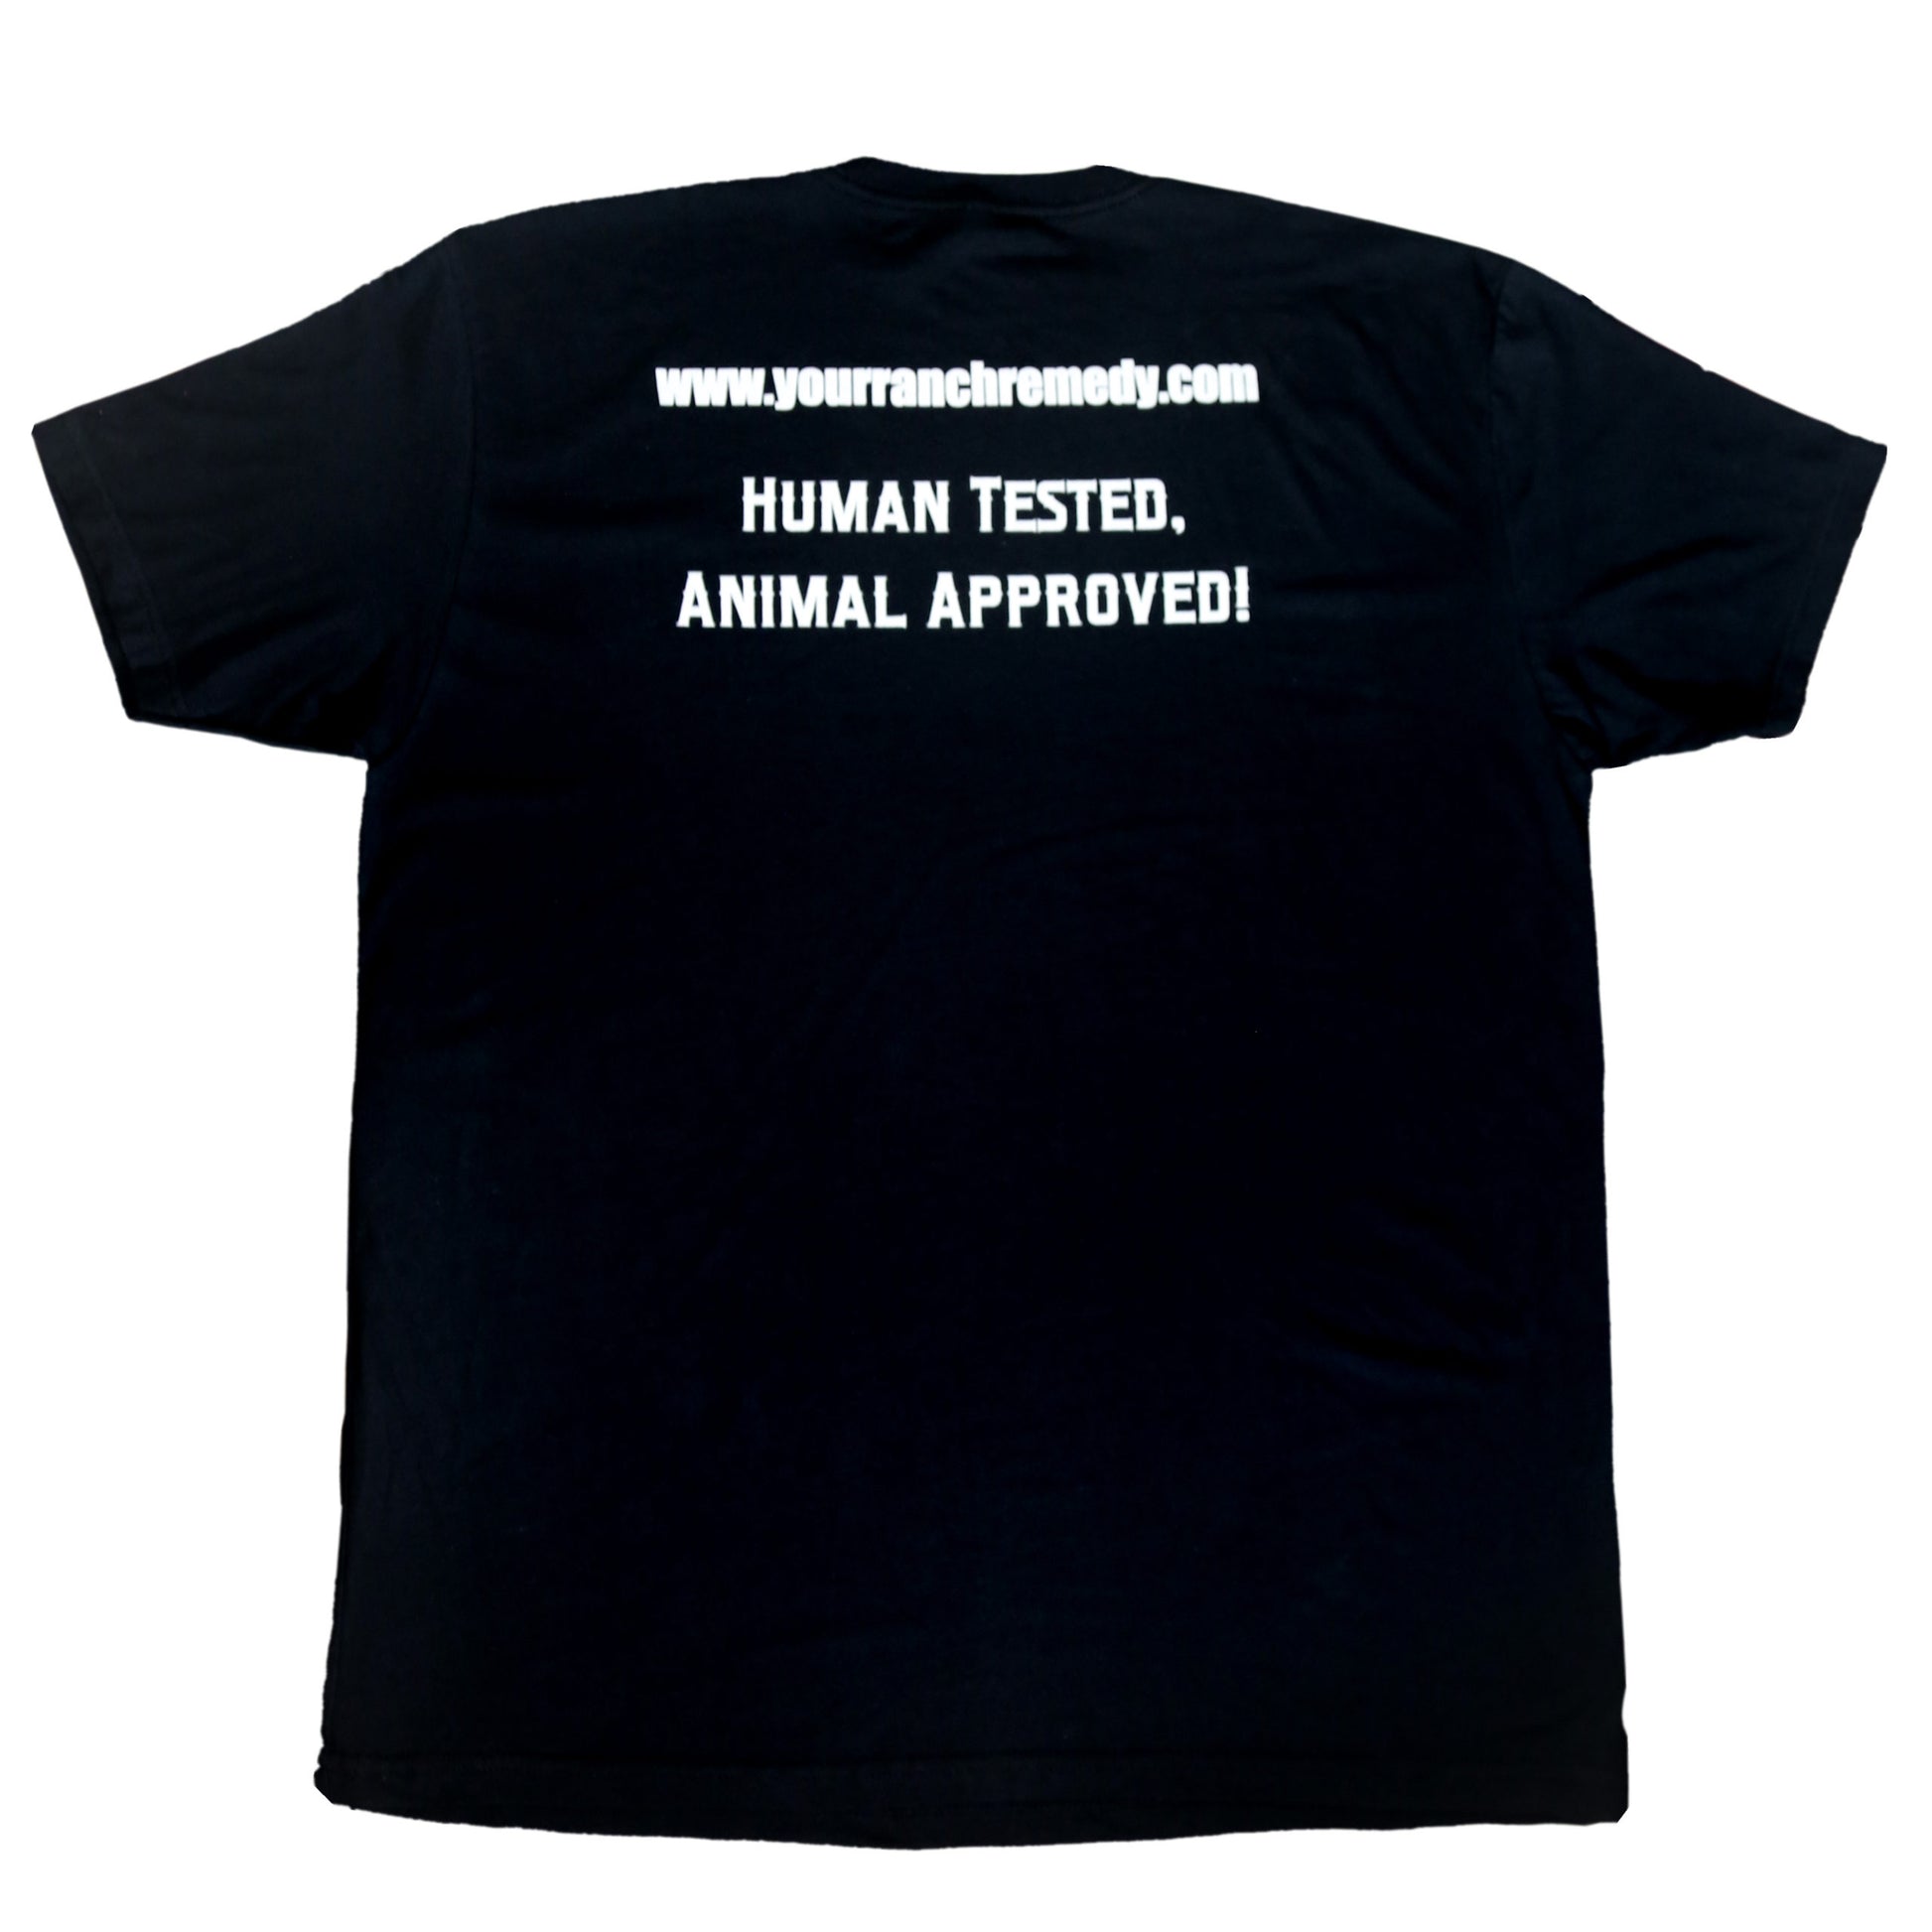 Back of the black Ranch Remedy graphic tee with the website (www.yourranchremedy.com) and the slogan "Human Tested, Animal Approved!" written in white text. 